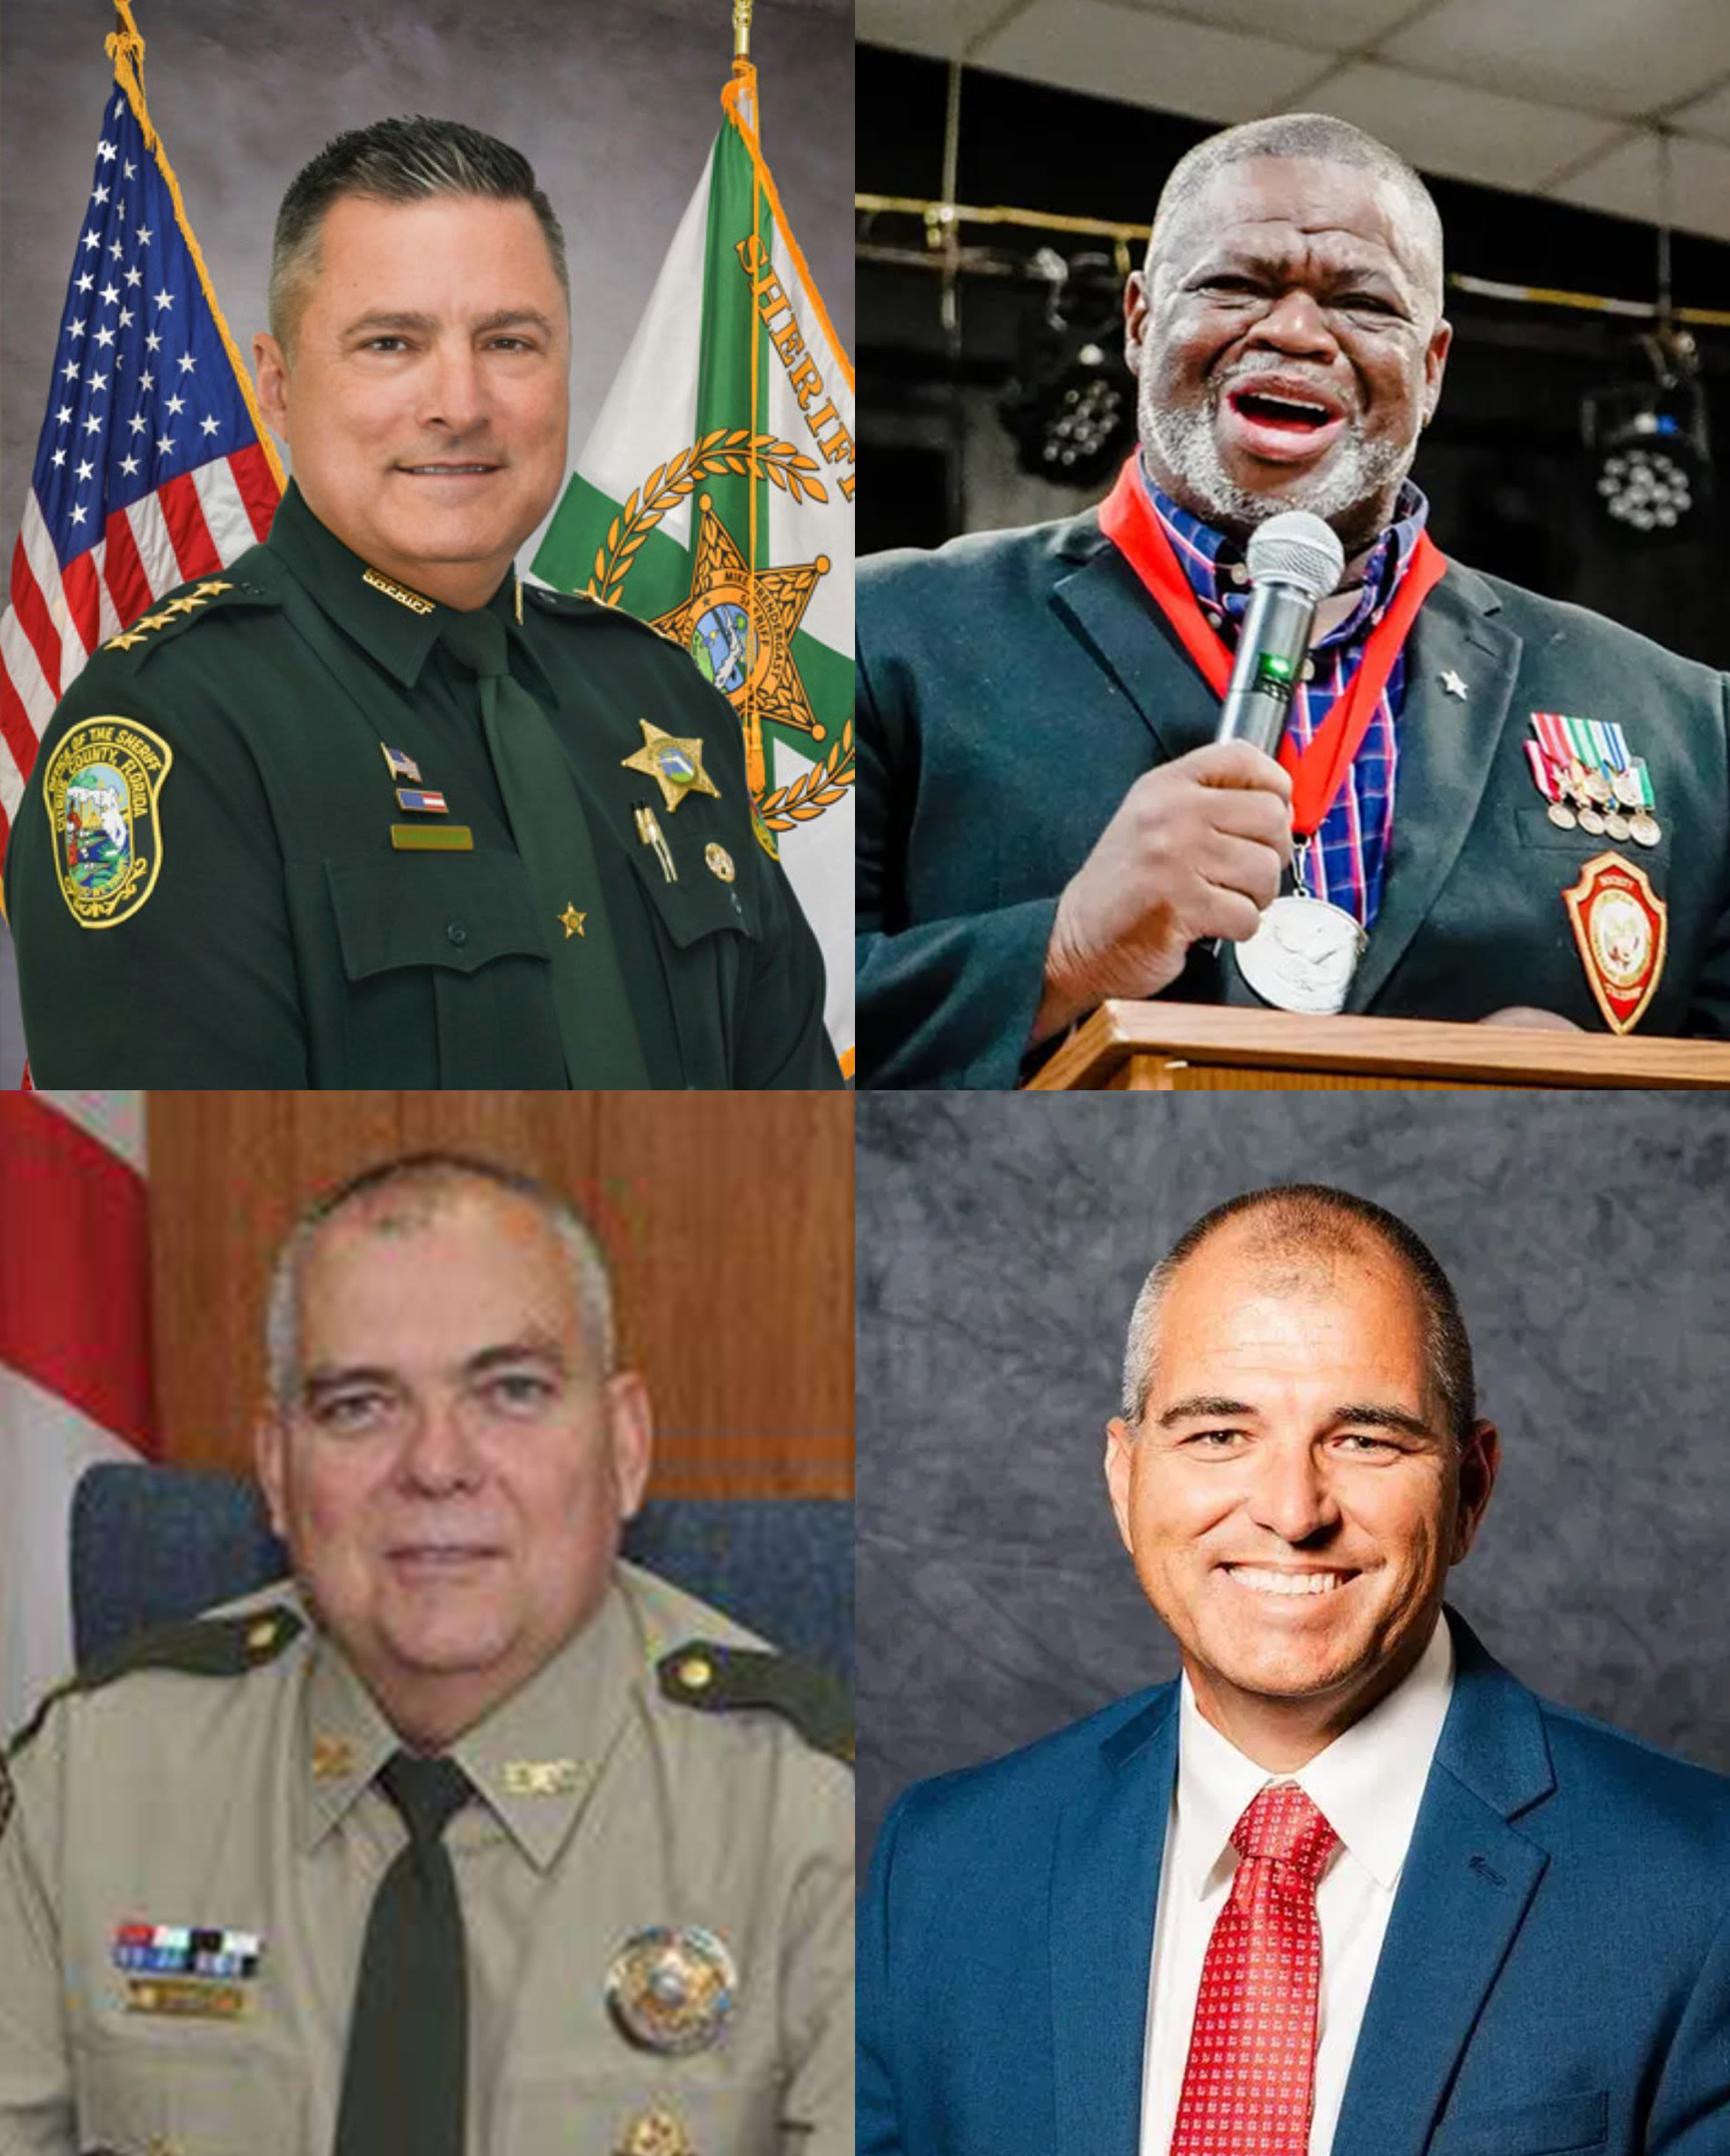 Sheriff Mike Prendergast's troubles give hope to Citrus County challengers